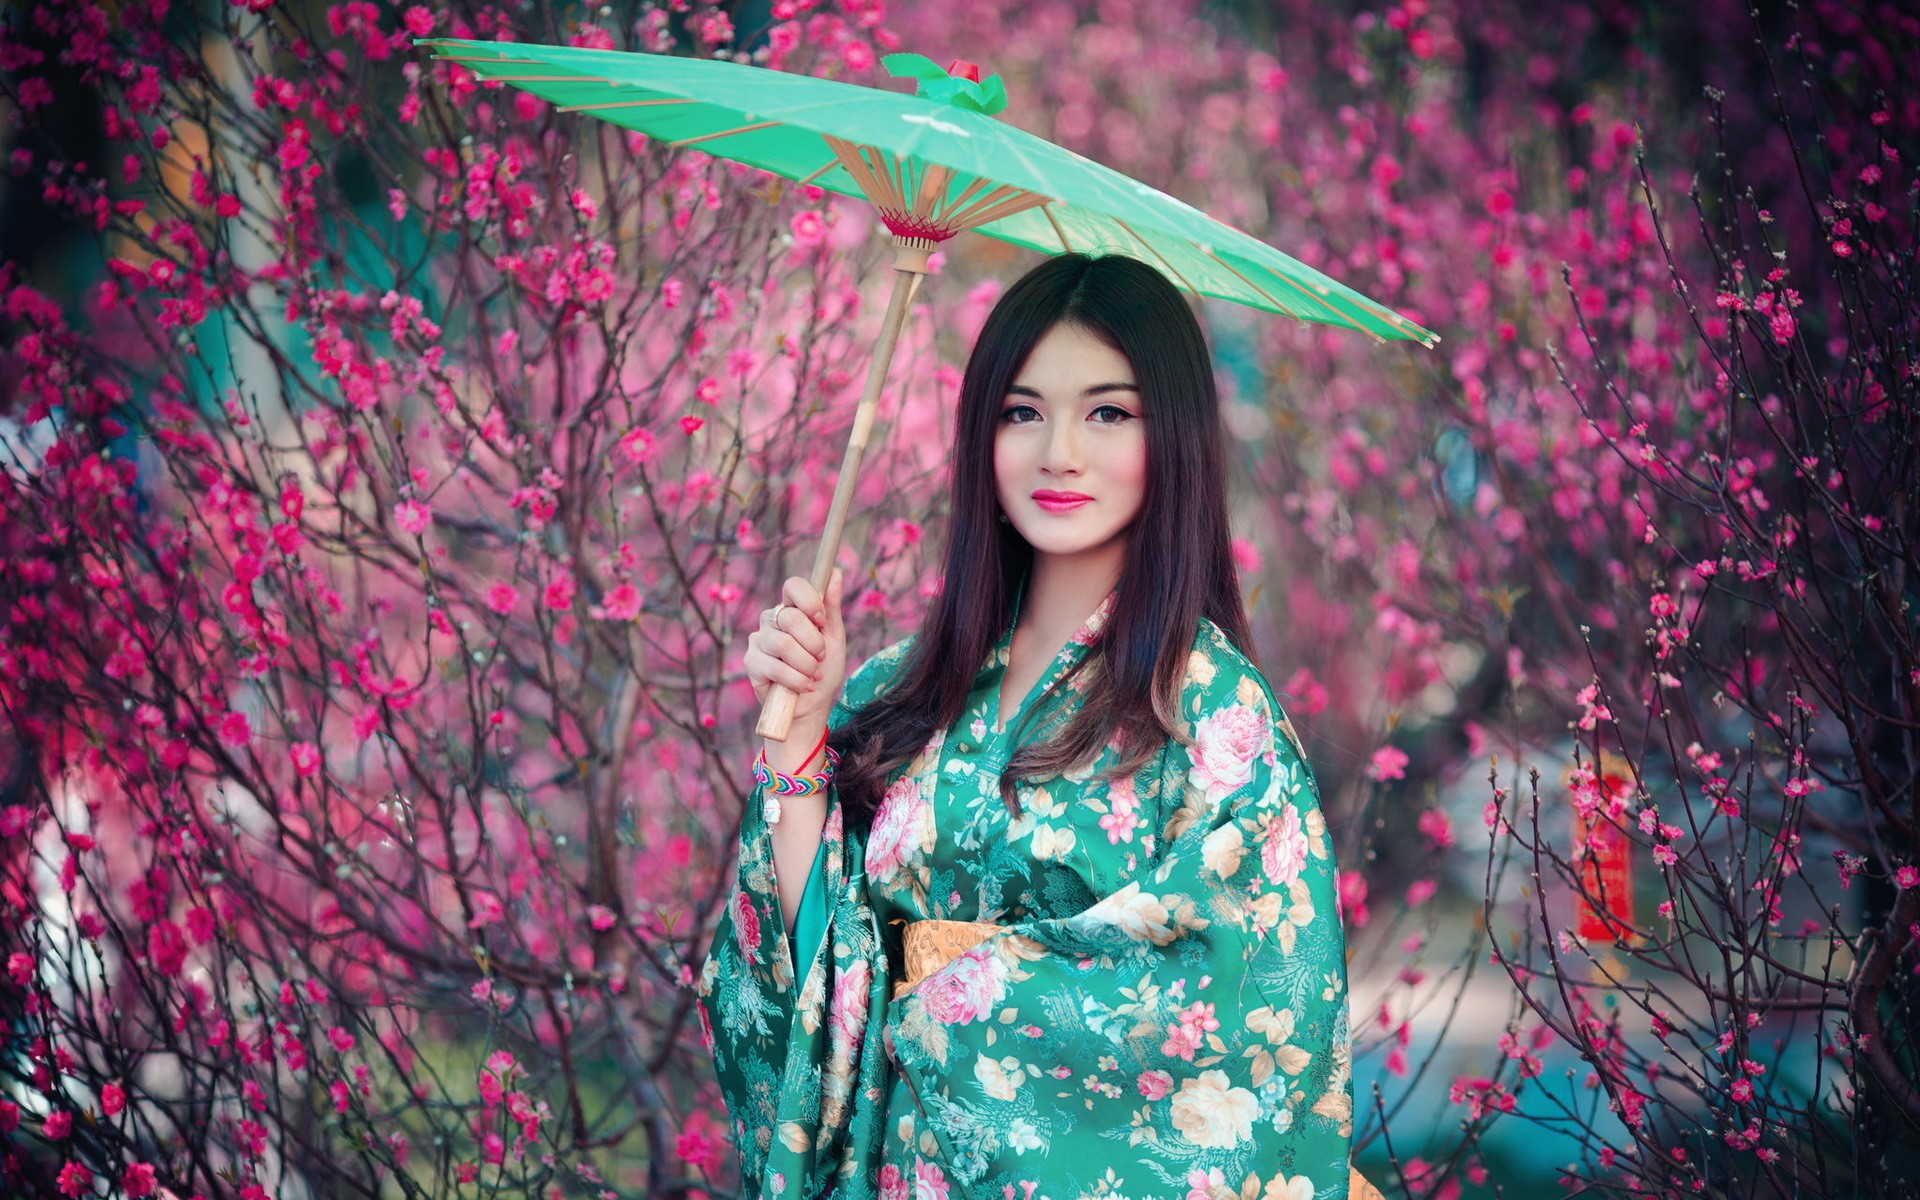 People 1920x1200 Asian women traditional clothing long hair brunette pink model umbrella women with umbrella makeup dark hair fantasy girl women outdoors looking at viewer plants outdoors Chinese